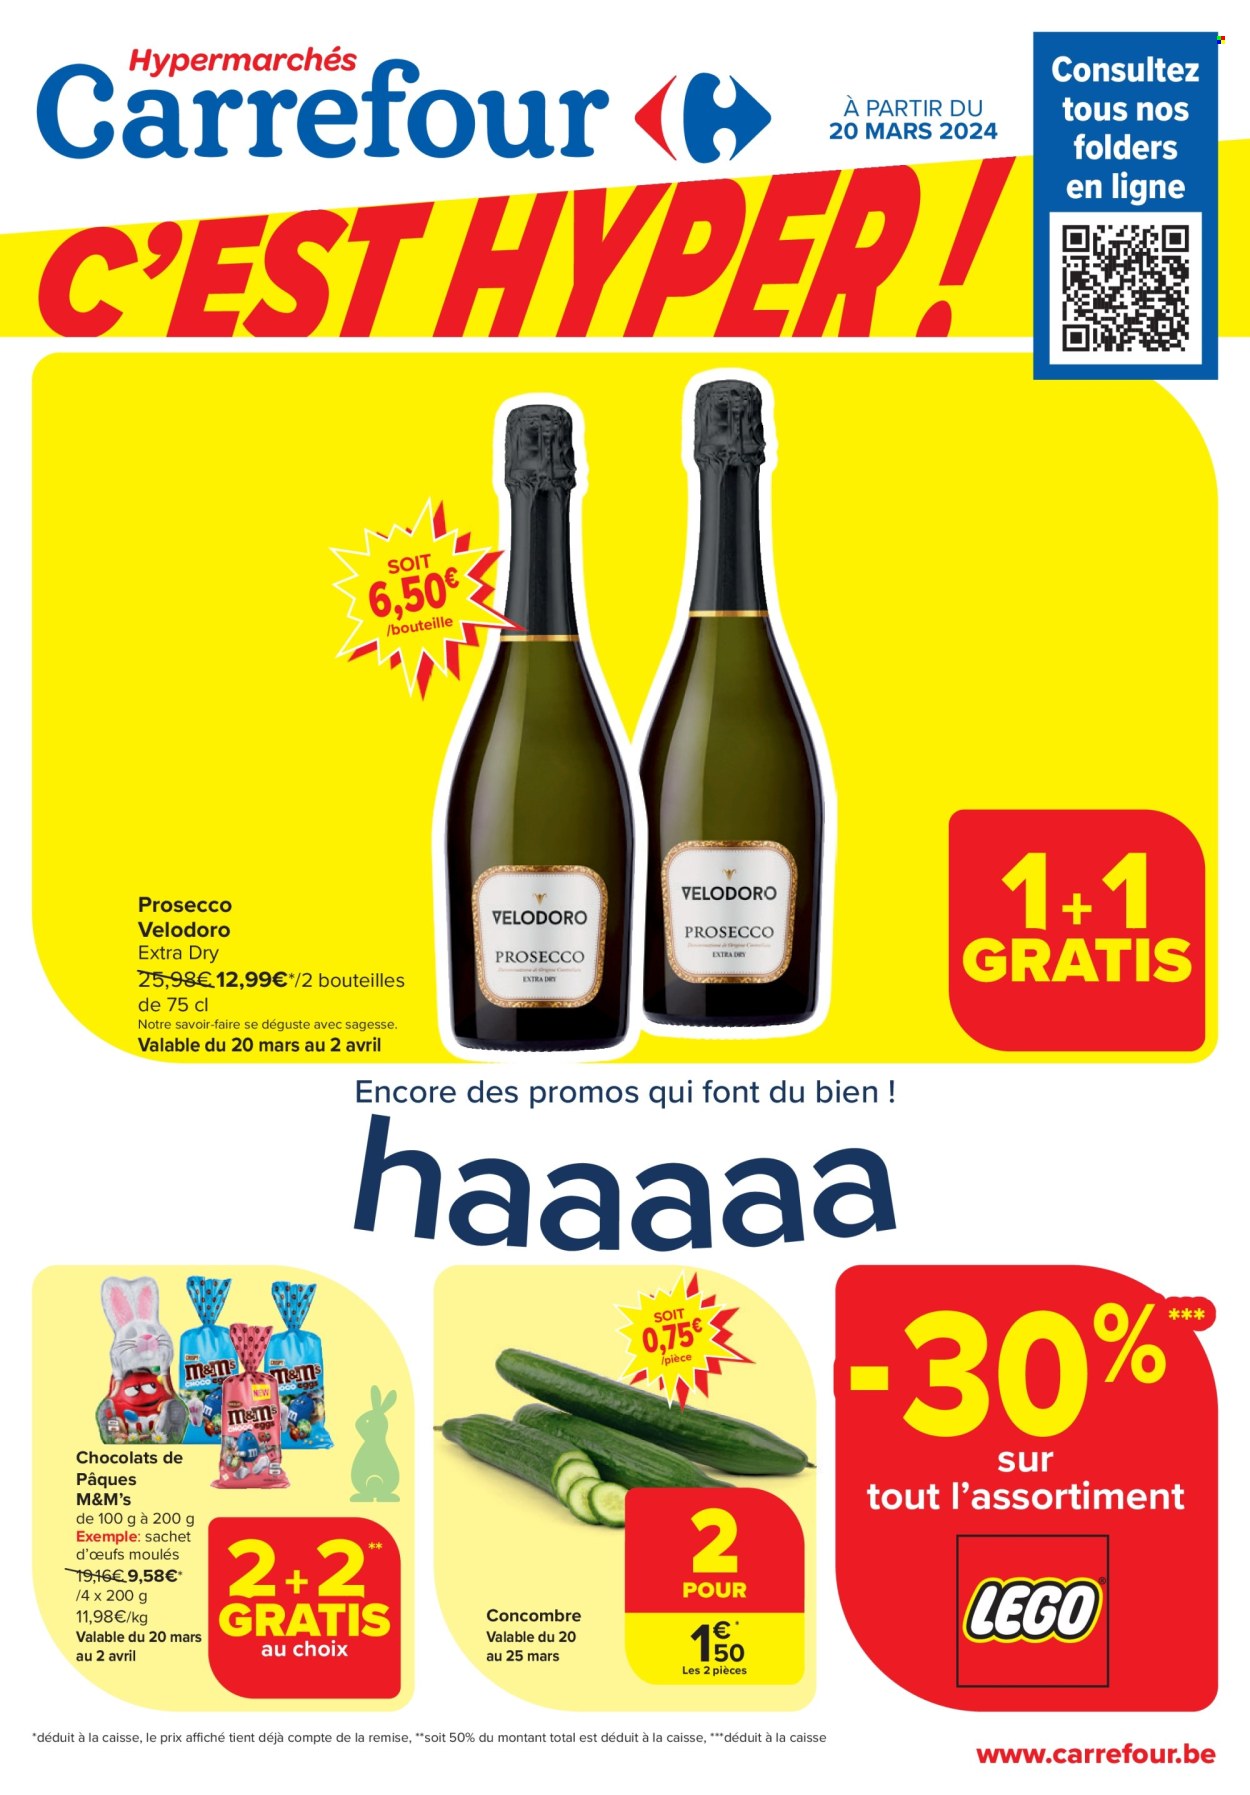 Catalogue Carrefour hypermarkt - 20.3.2024 - 2.4.2024. Page 1.